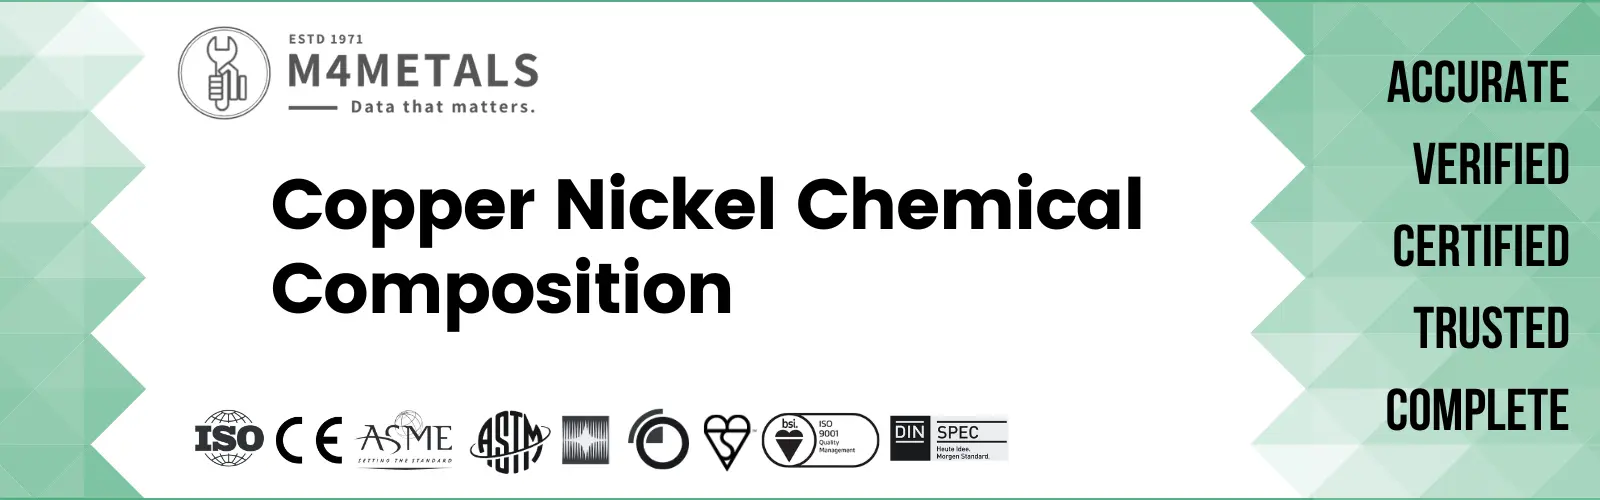 Copper Nickel Chemical Composition